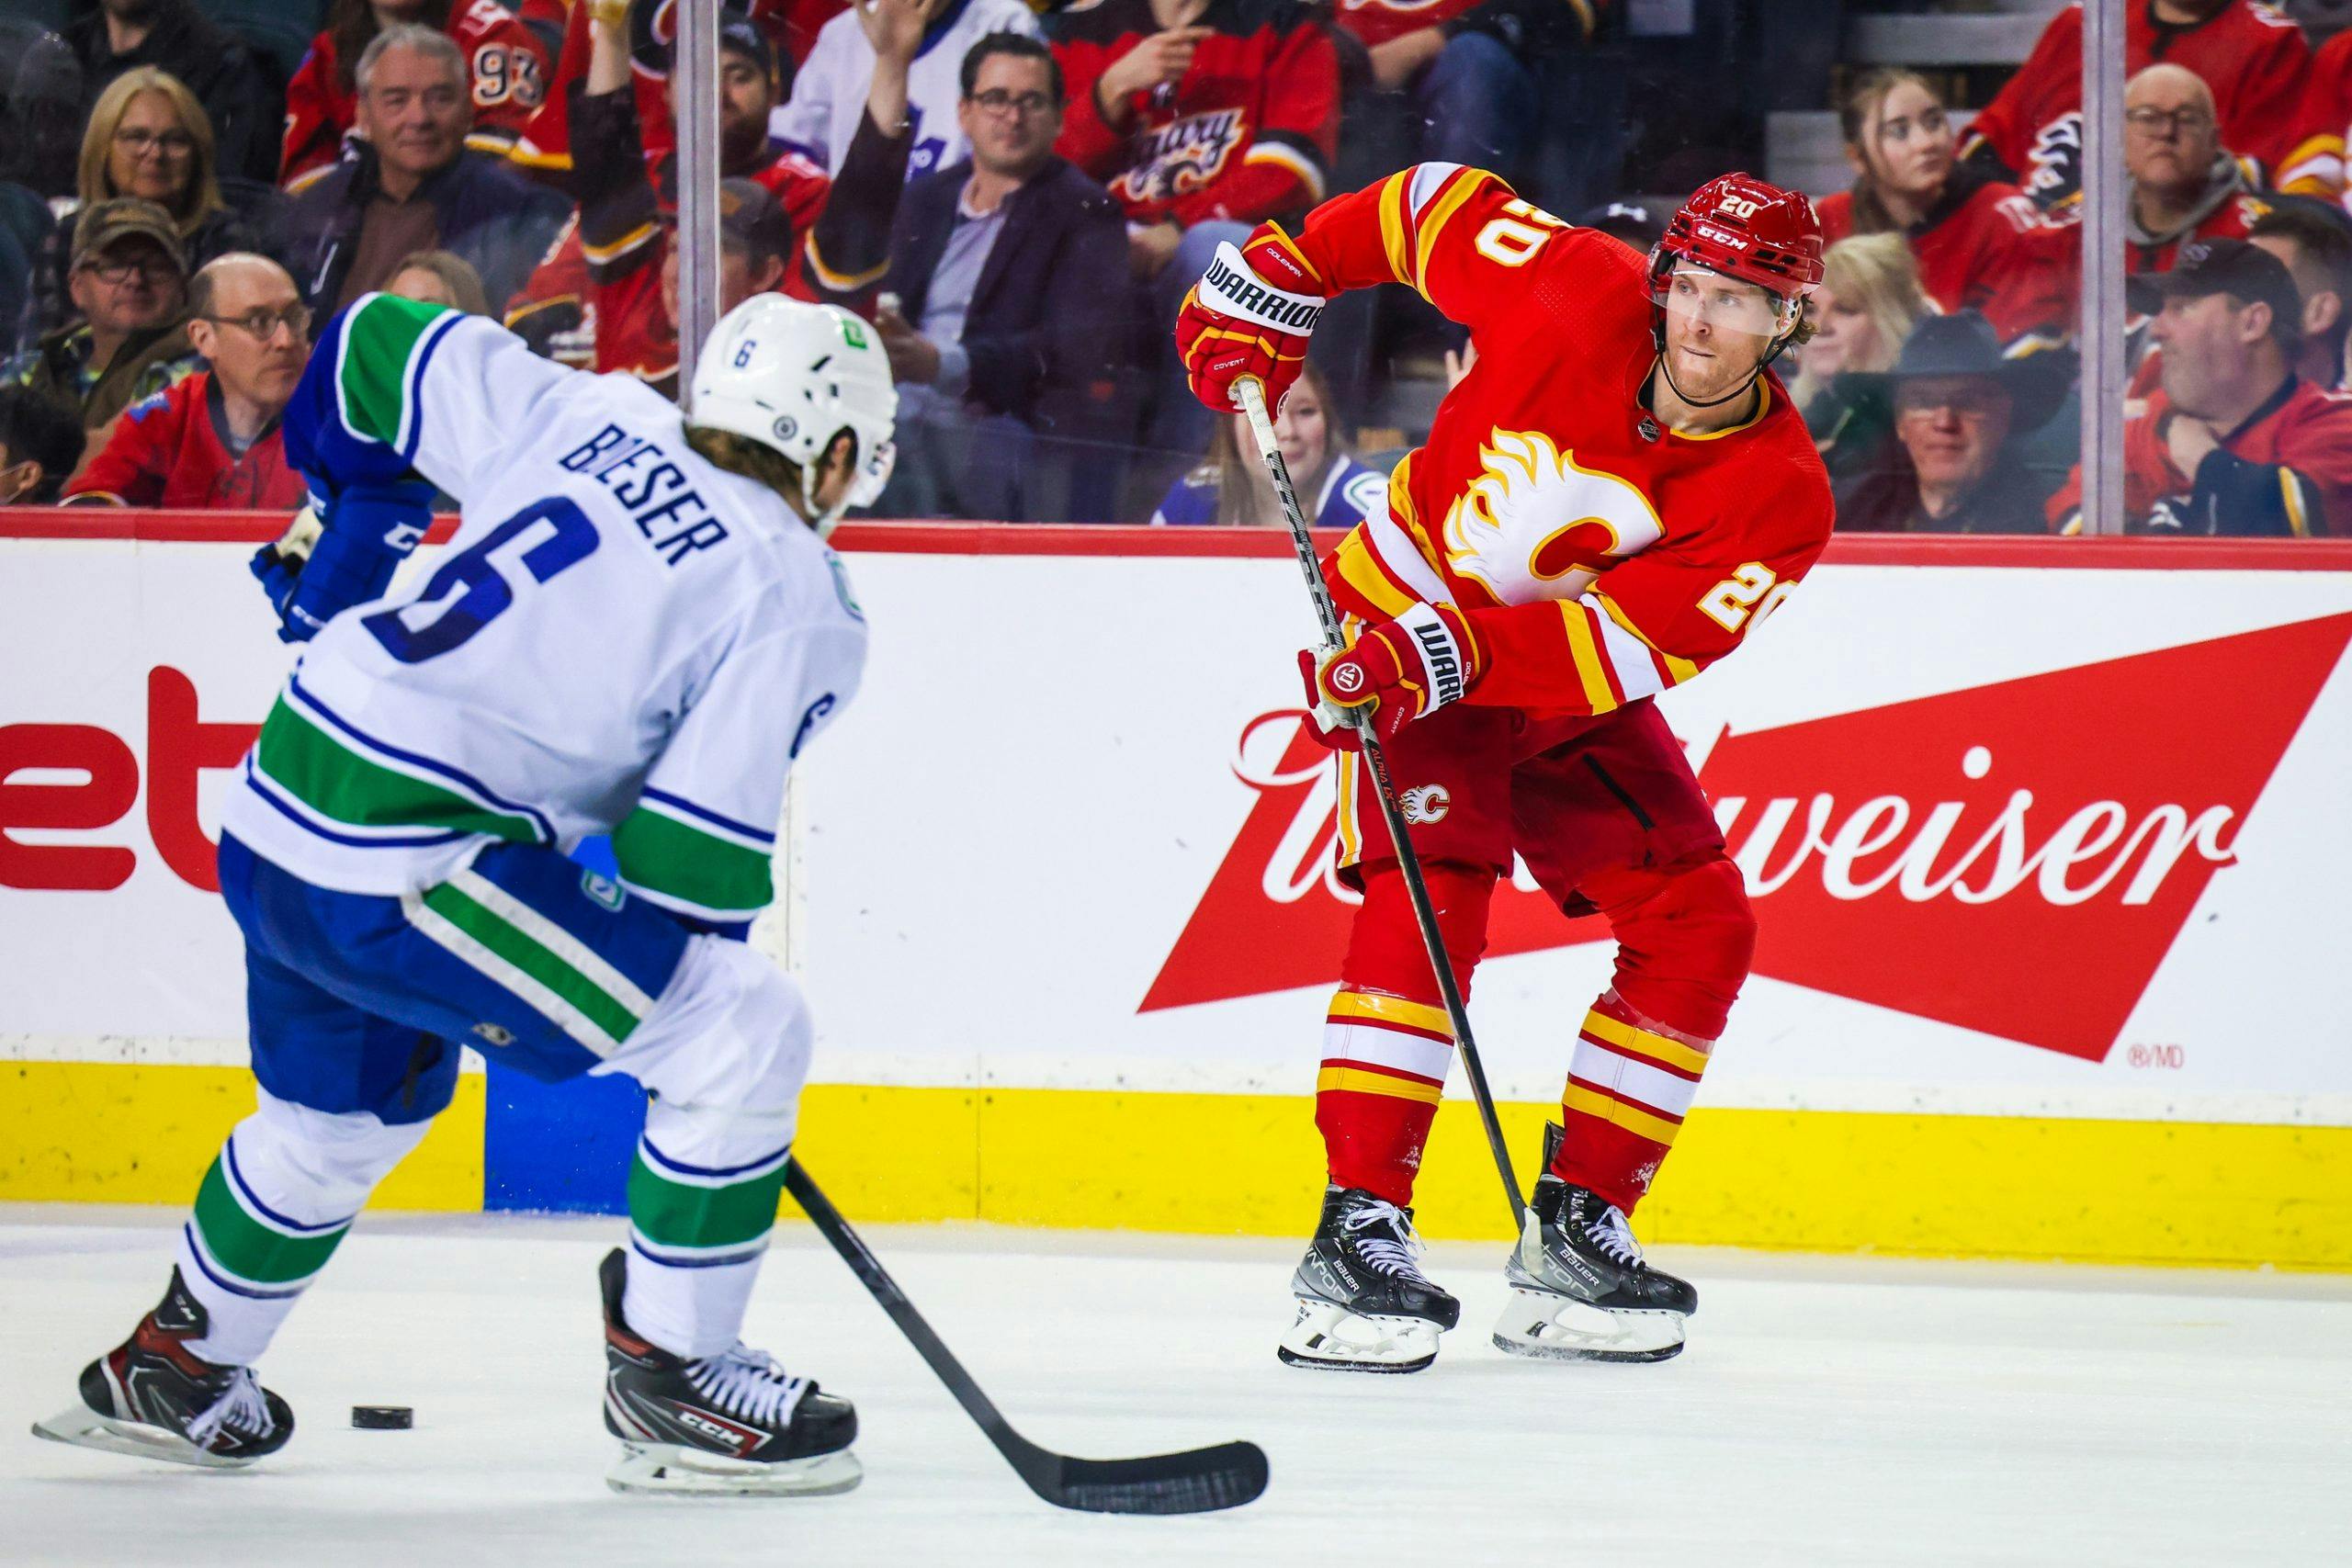 Canucks 5 Flames 3: Top prospects put on a show in Calgary